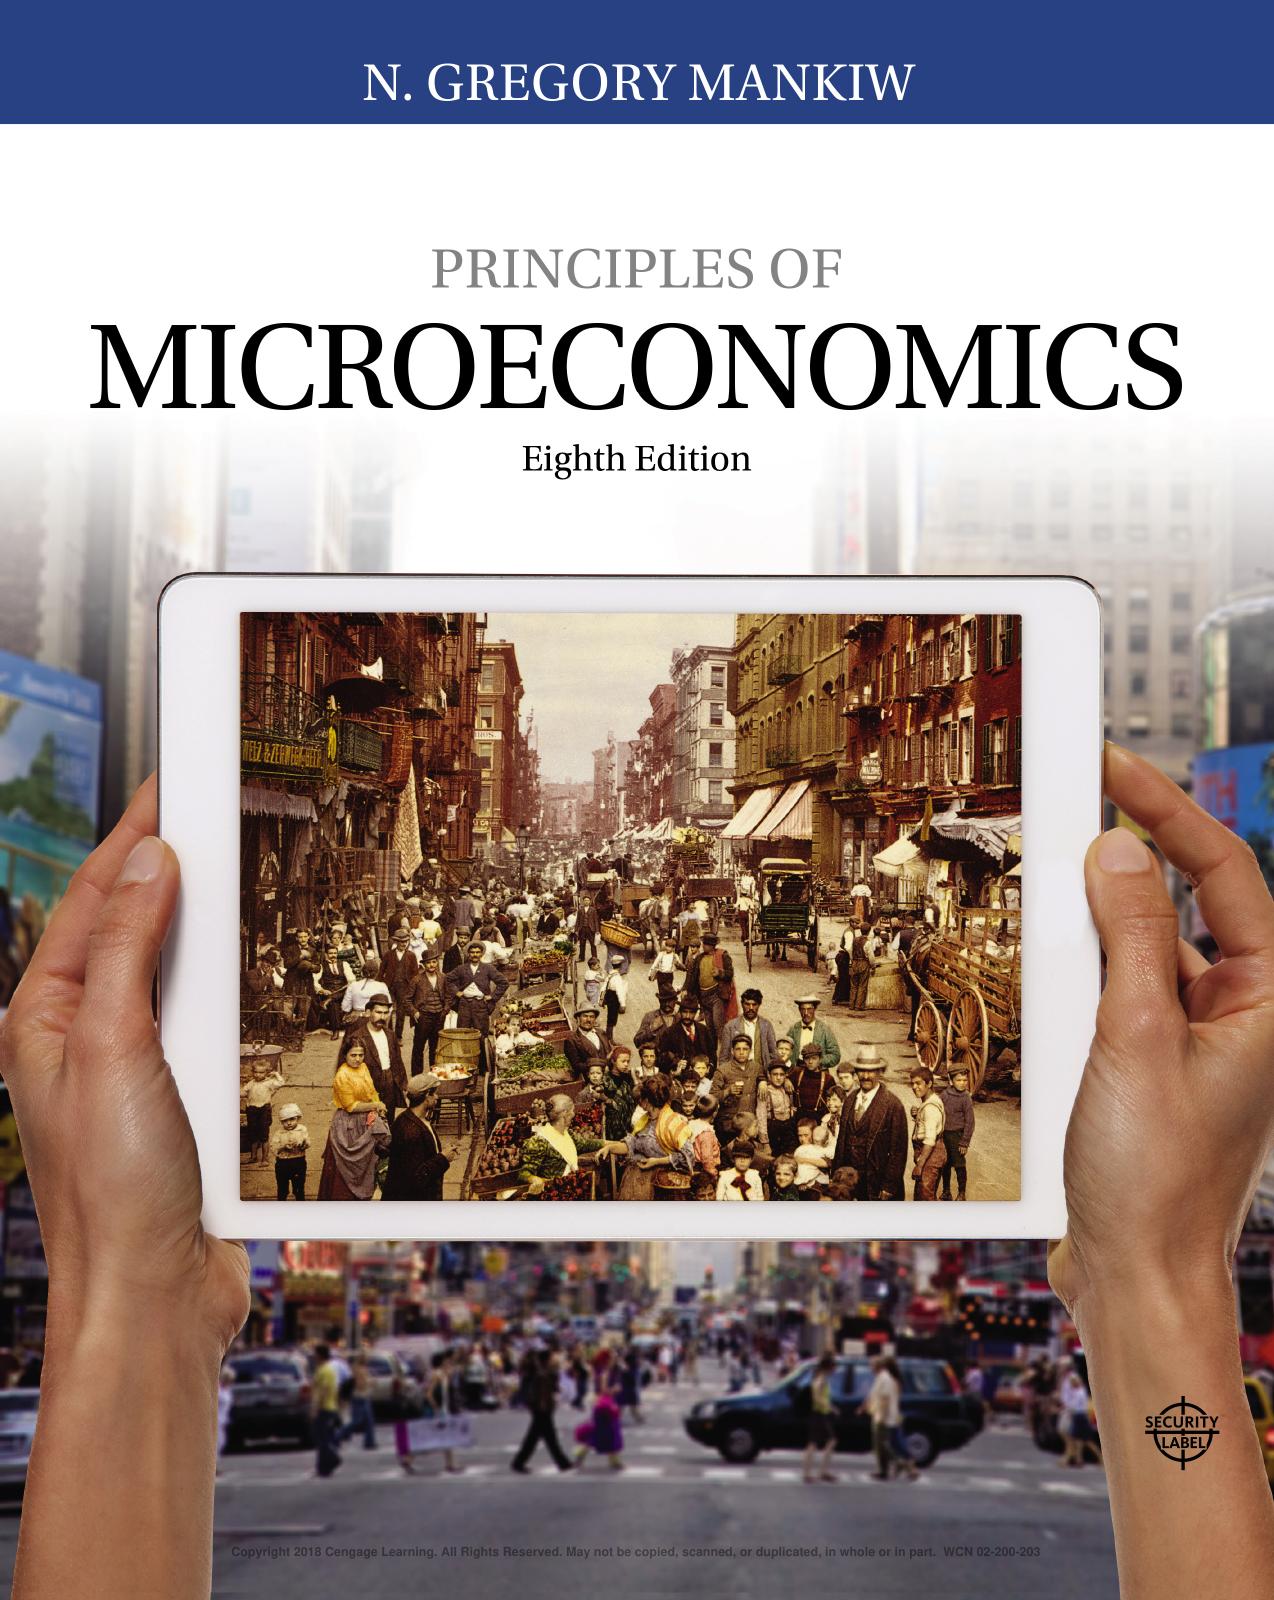 Principles of Microeconomics by N. Gregory Mankiw  8th ed 2018